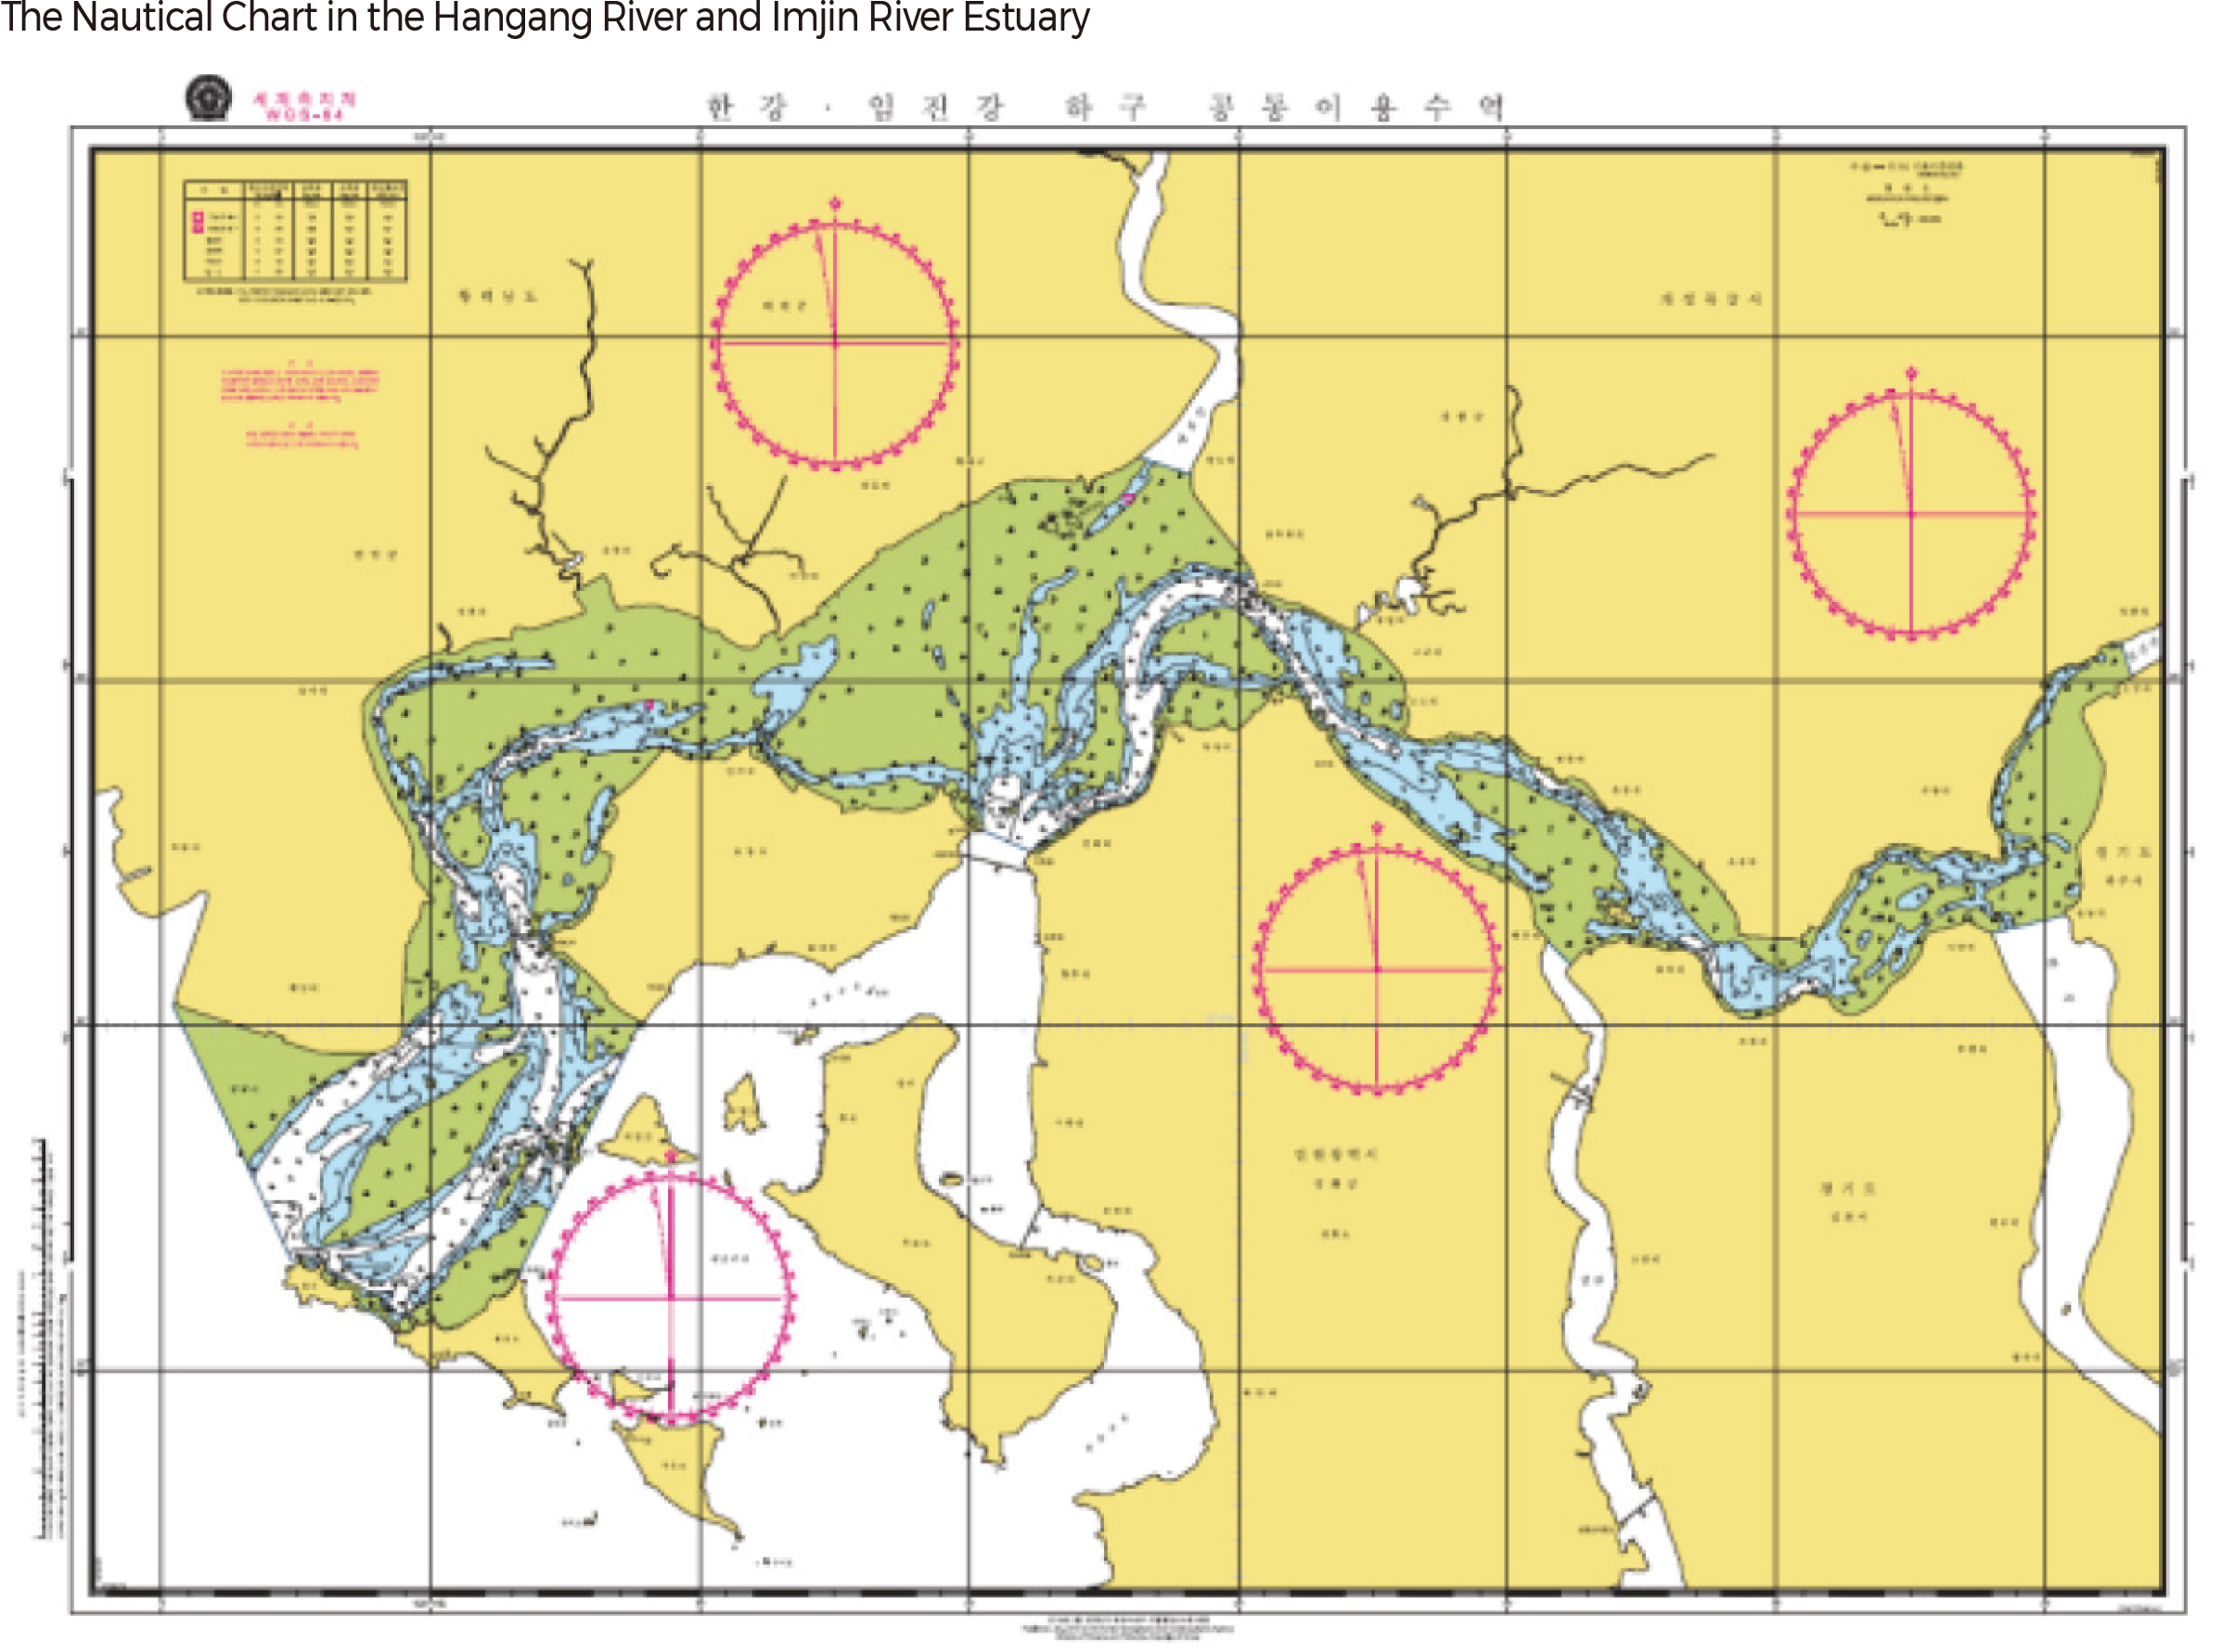 The Nautical Chart in the Hangang River and Imjin River Estuary